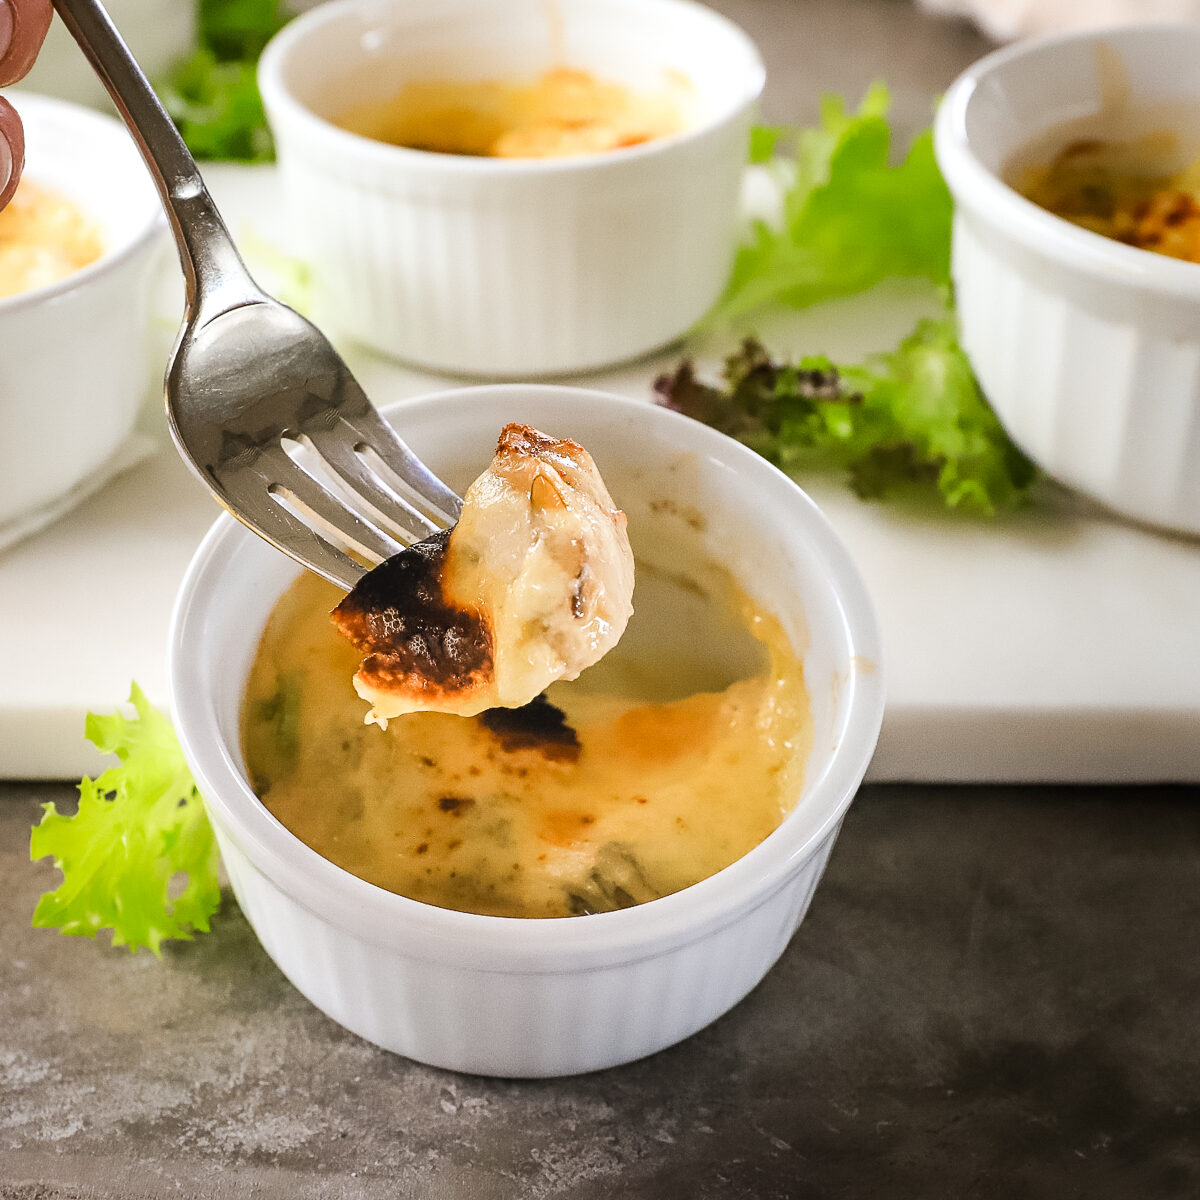 A fork with a piece of cheesy baked oyster lifted out of a white ramekin. It is a creamy yellow color with bubbly black and brown spots on top. 